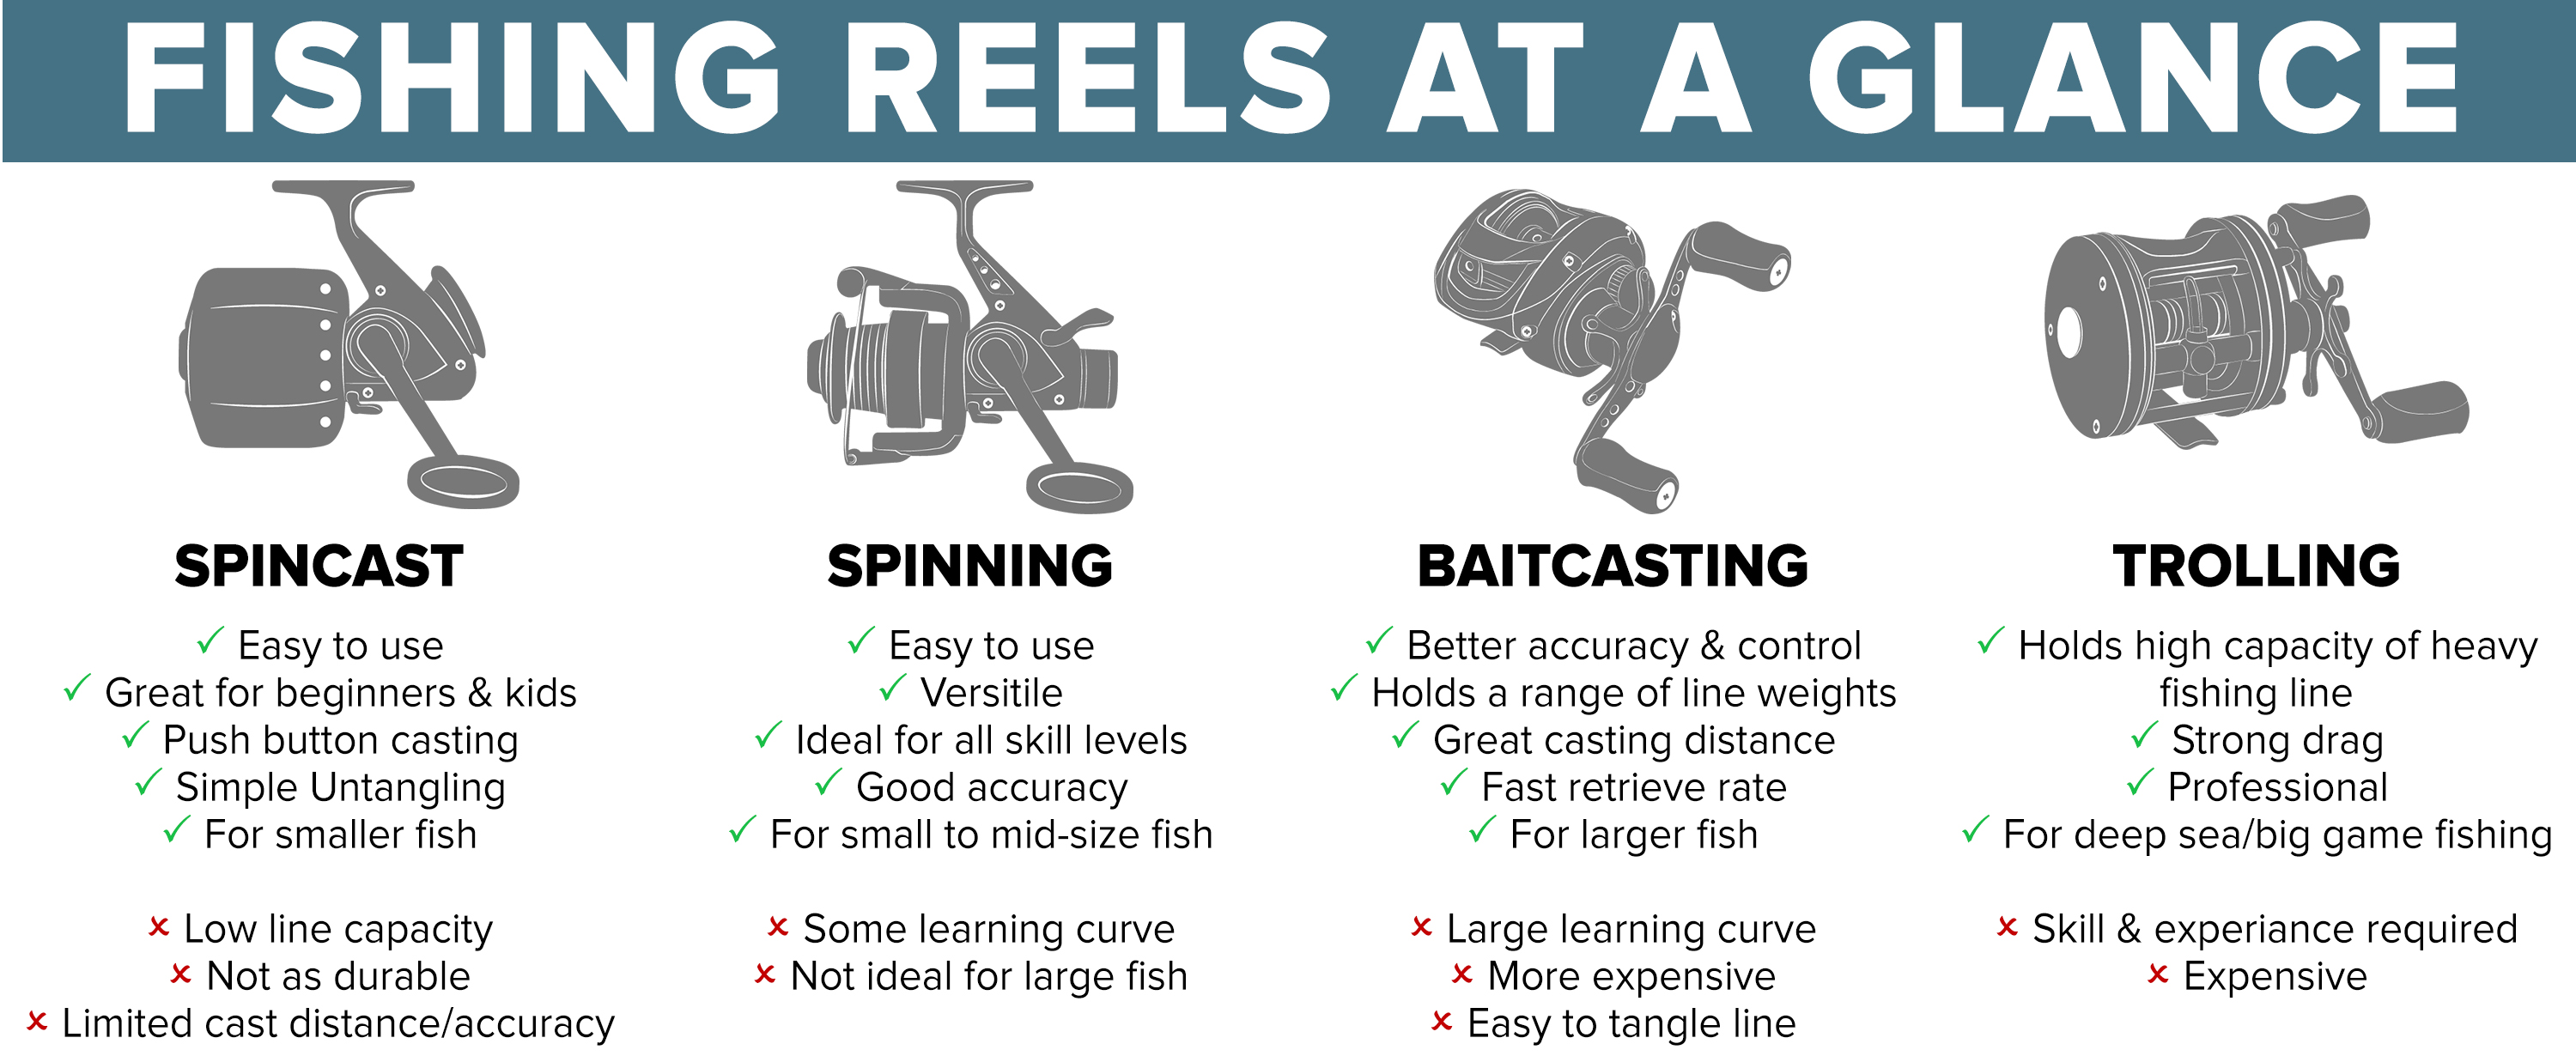 Pole and line, trolling and handline (hook and lines), trolling fishing 